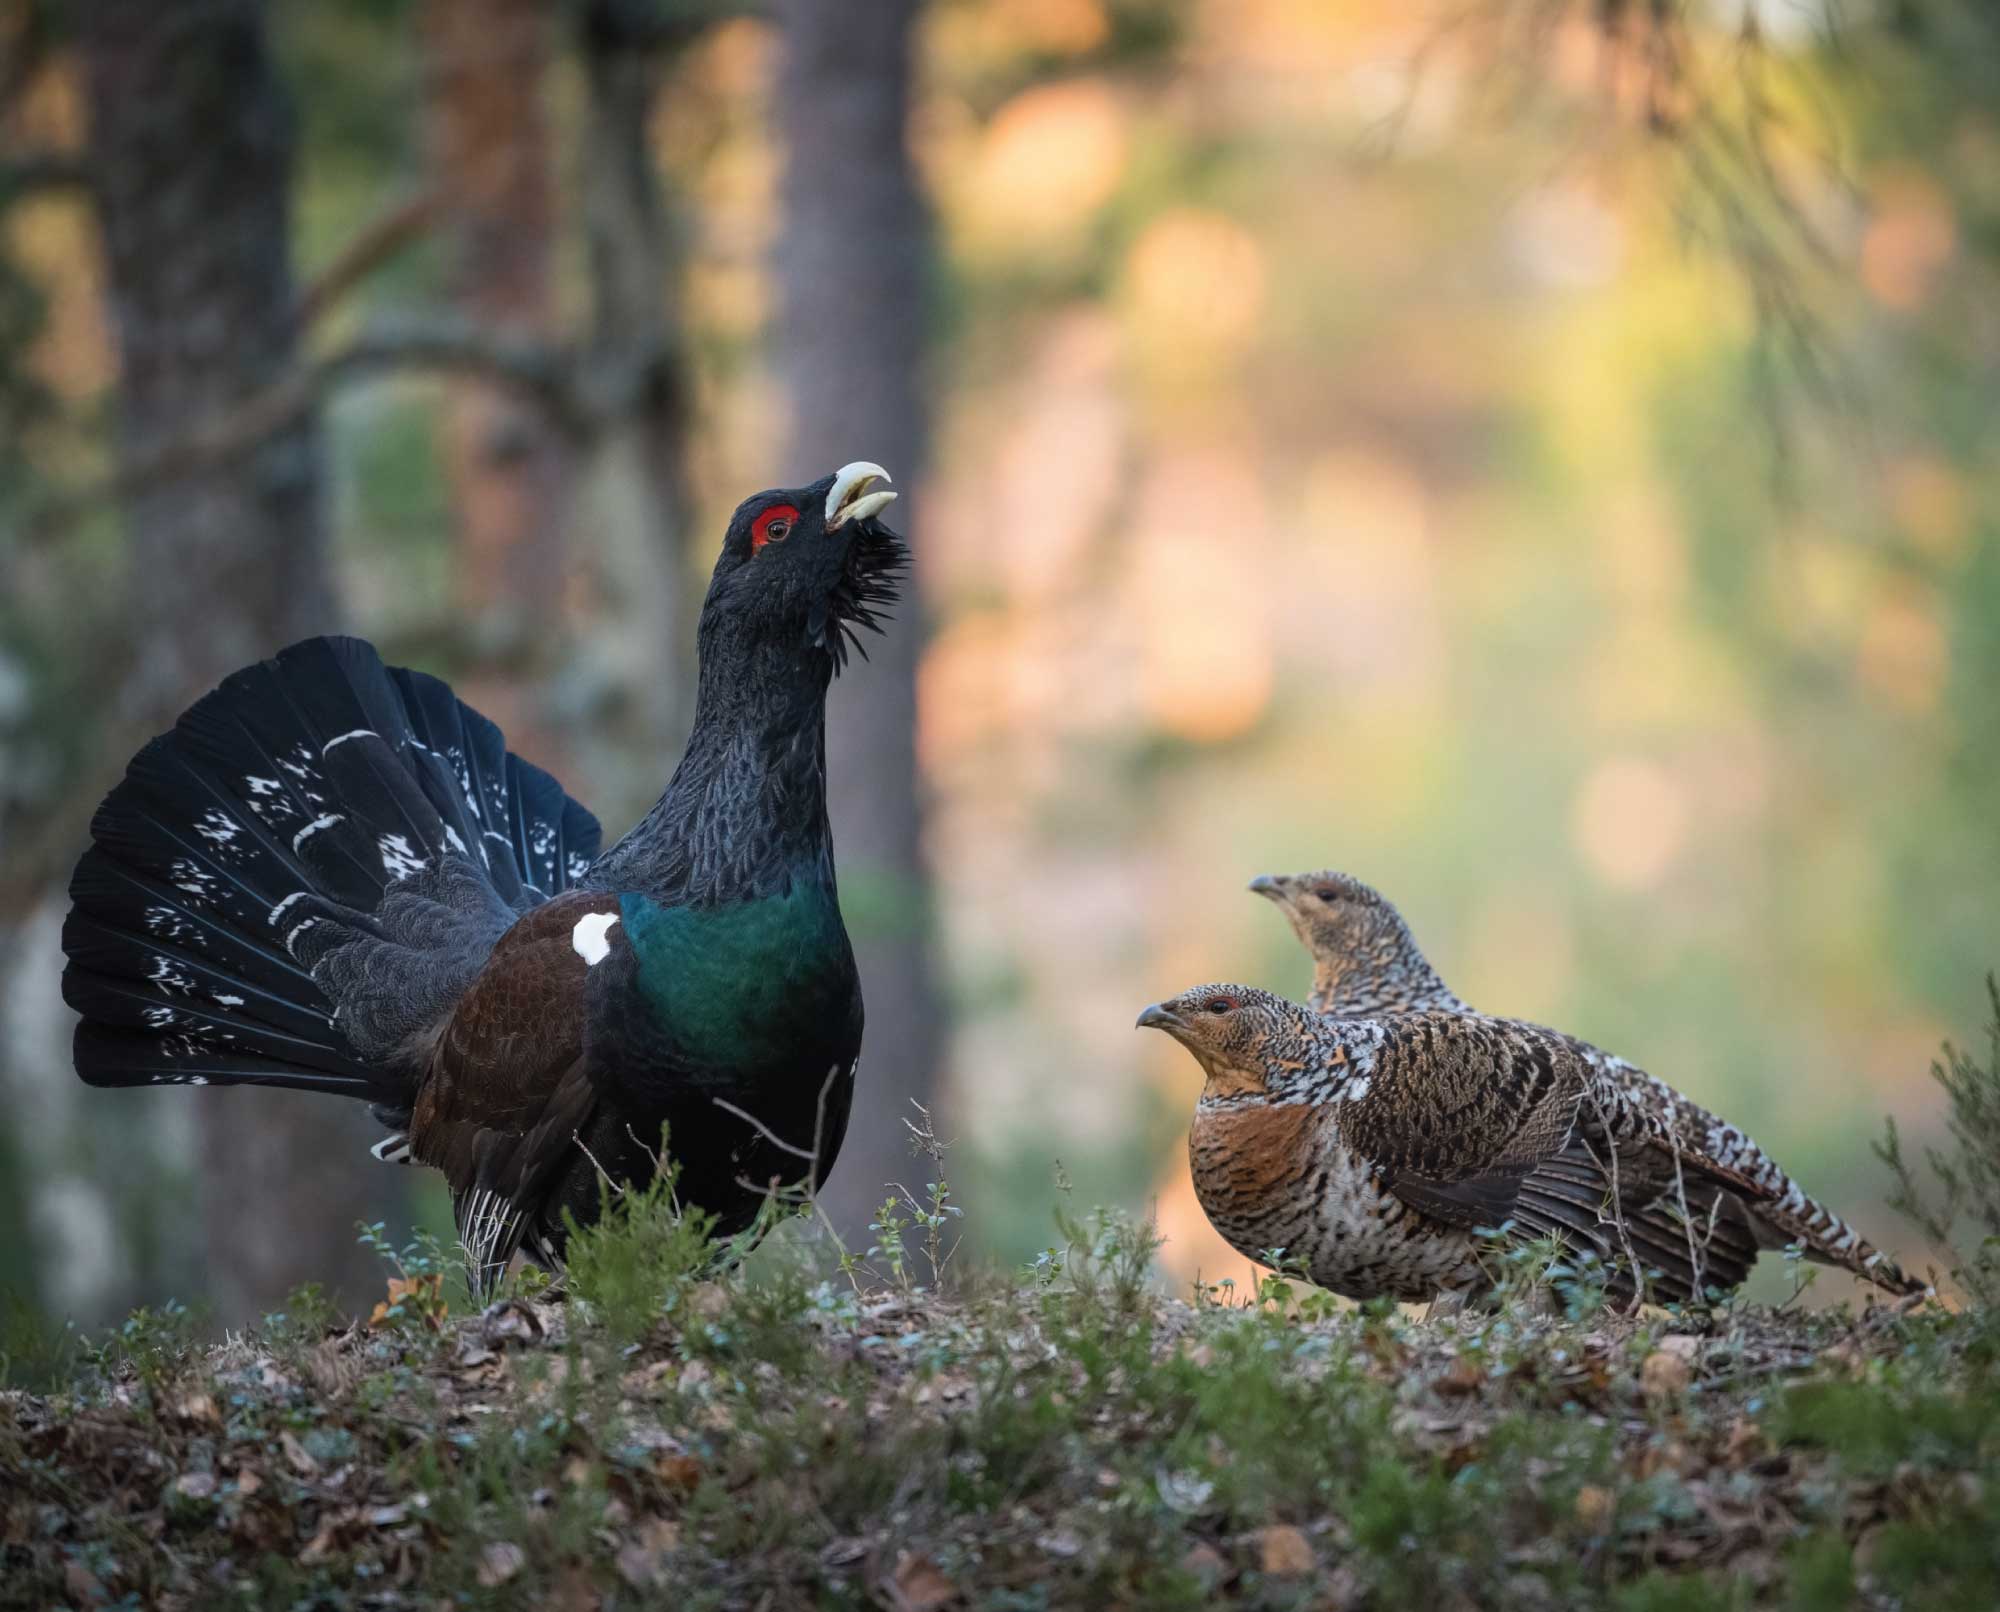 Failed Game Bird Introductions in North America - History of Non-Natives